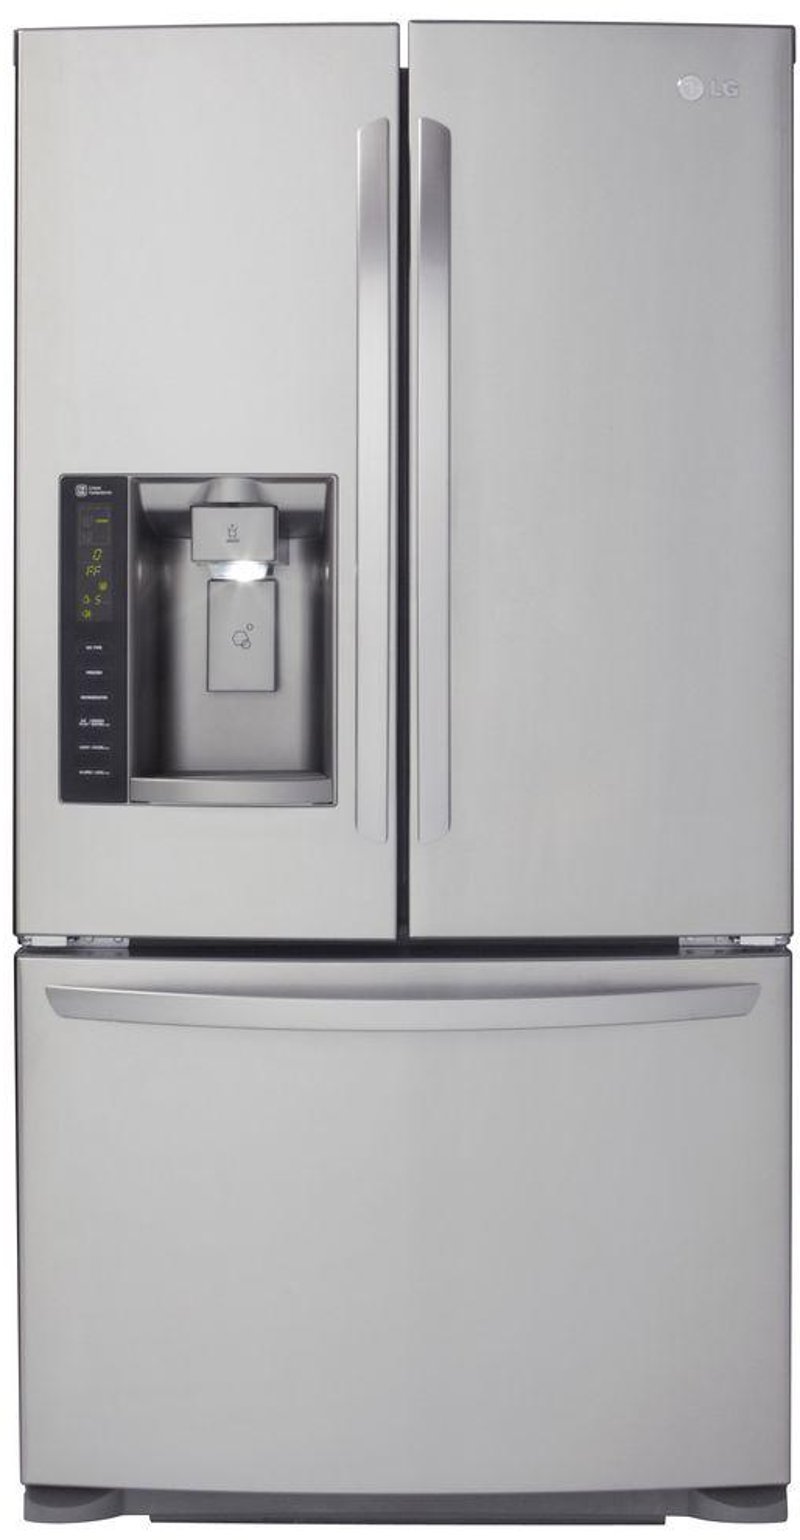 LG French Door Refrigerator 36 Inch Stainless Steel RC Willey Furniture Store